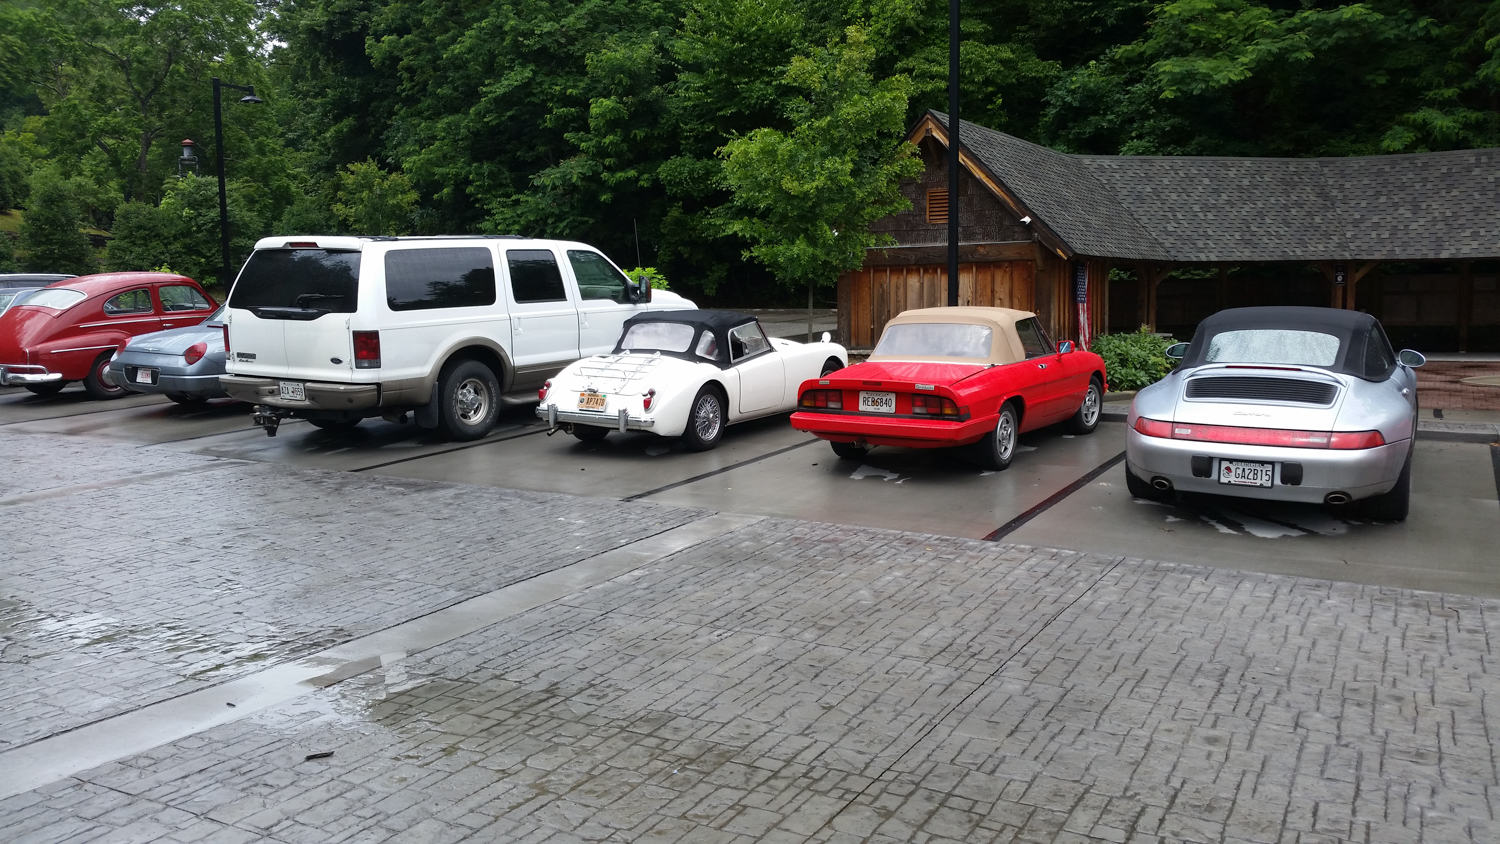 Parking at the Lodge for lunch. Not everyone drove their show car on the tour. The Ford Excursion was driven by a racer - you should see it in the hairpins. 